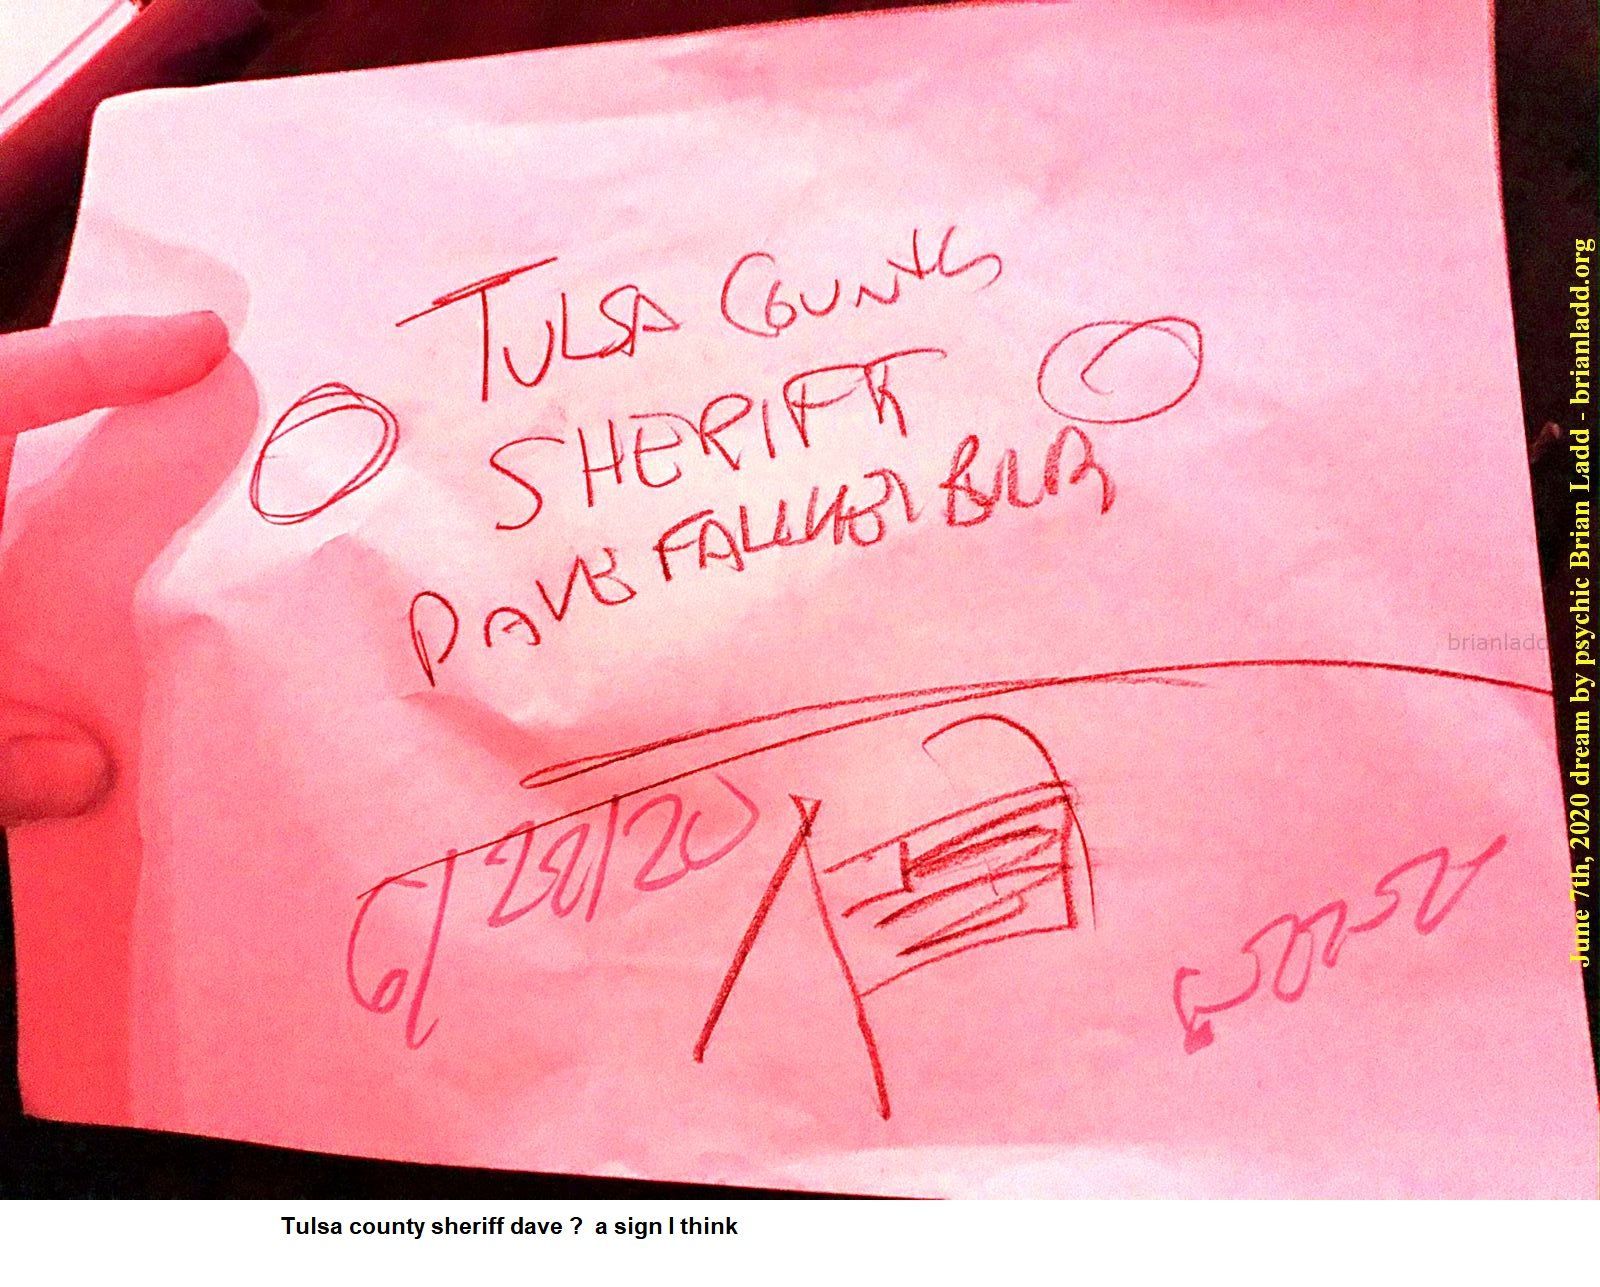 13192 22 June 2020 3 - Tulsa County Sheriff Dave ?  A Sign I Think....
Tulsa County Sheriff Dave ?  A Sign I Think.
